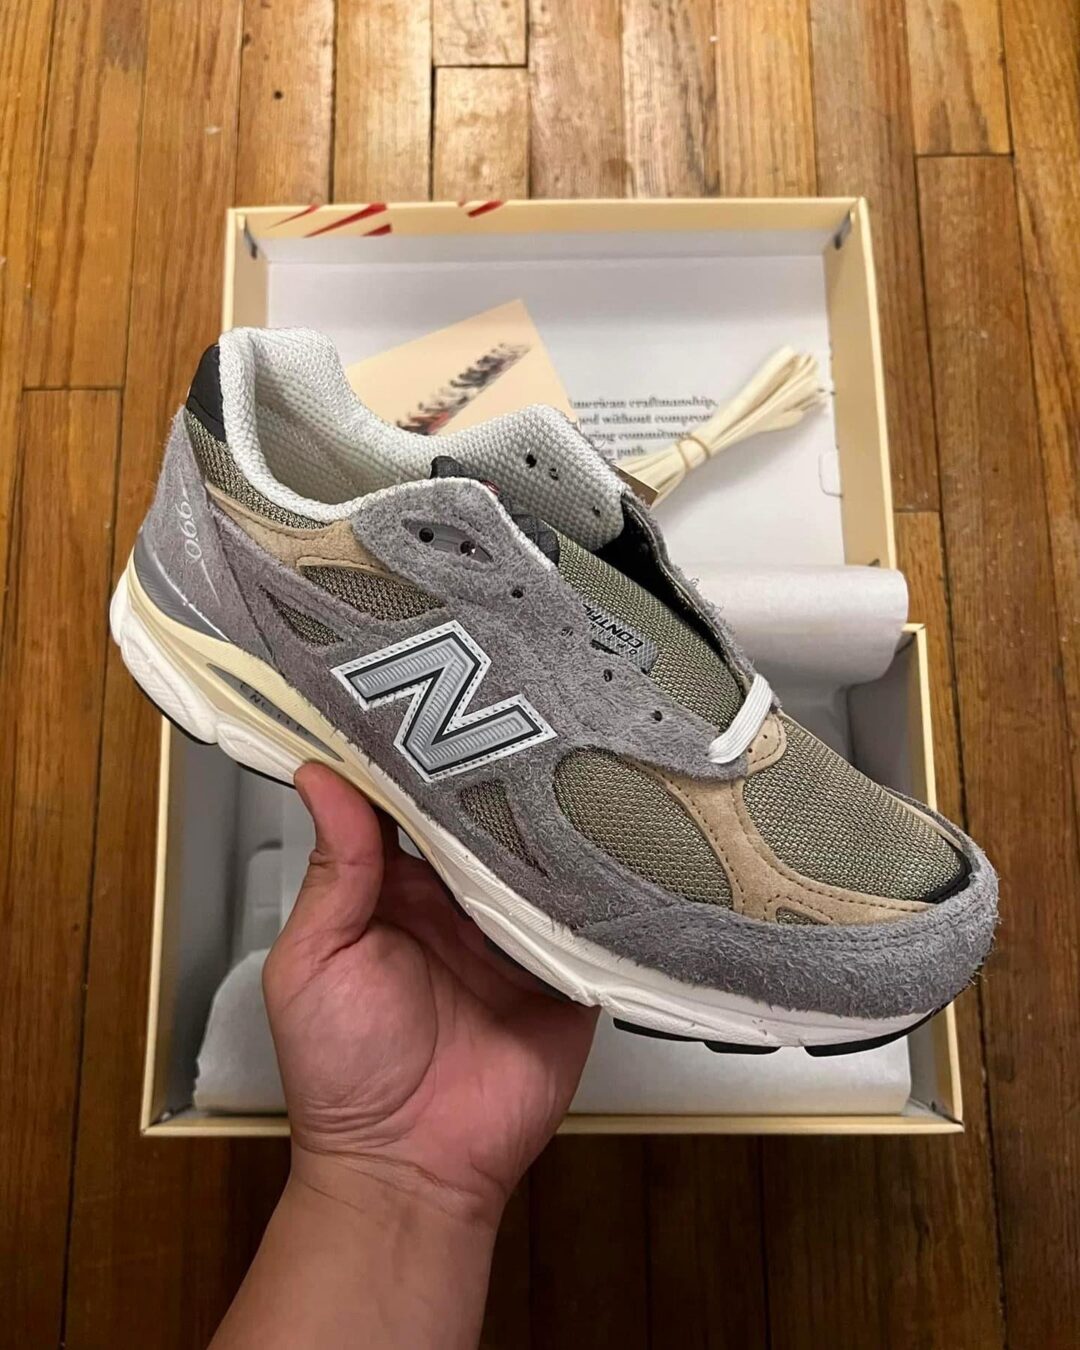 NEW BALANCE ニューバランス M990 TG3 / MADE IN U.S.A 22SS グレー